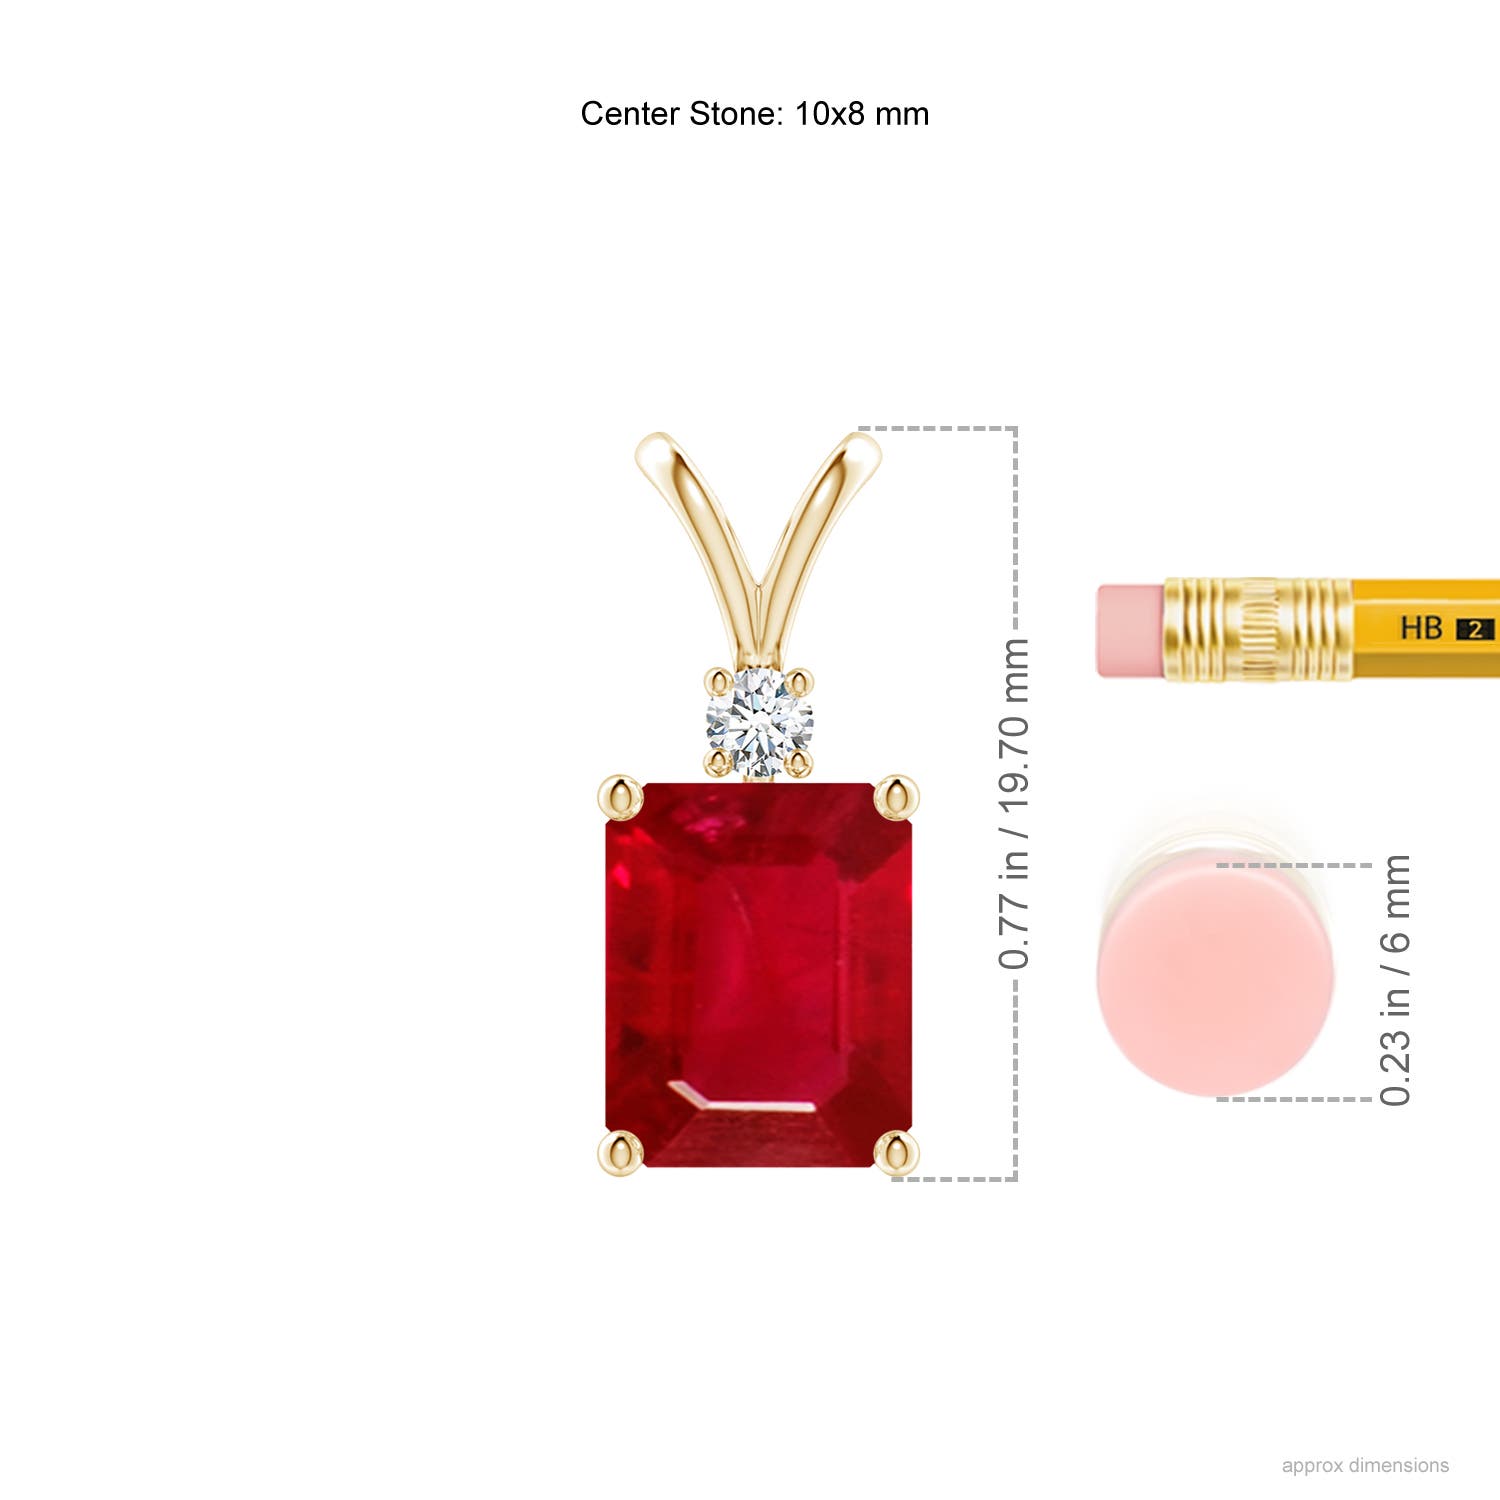 AAA - Ruby / 4.11 CT / 14 KT Yellow Gold